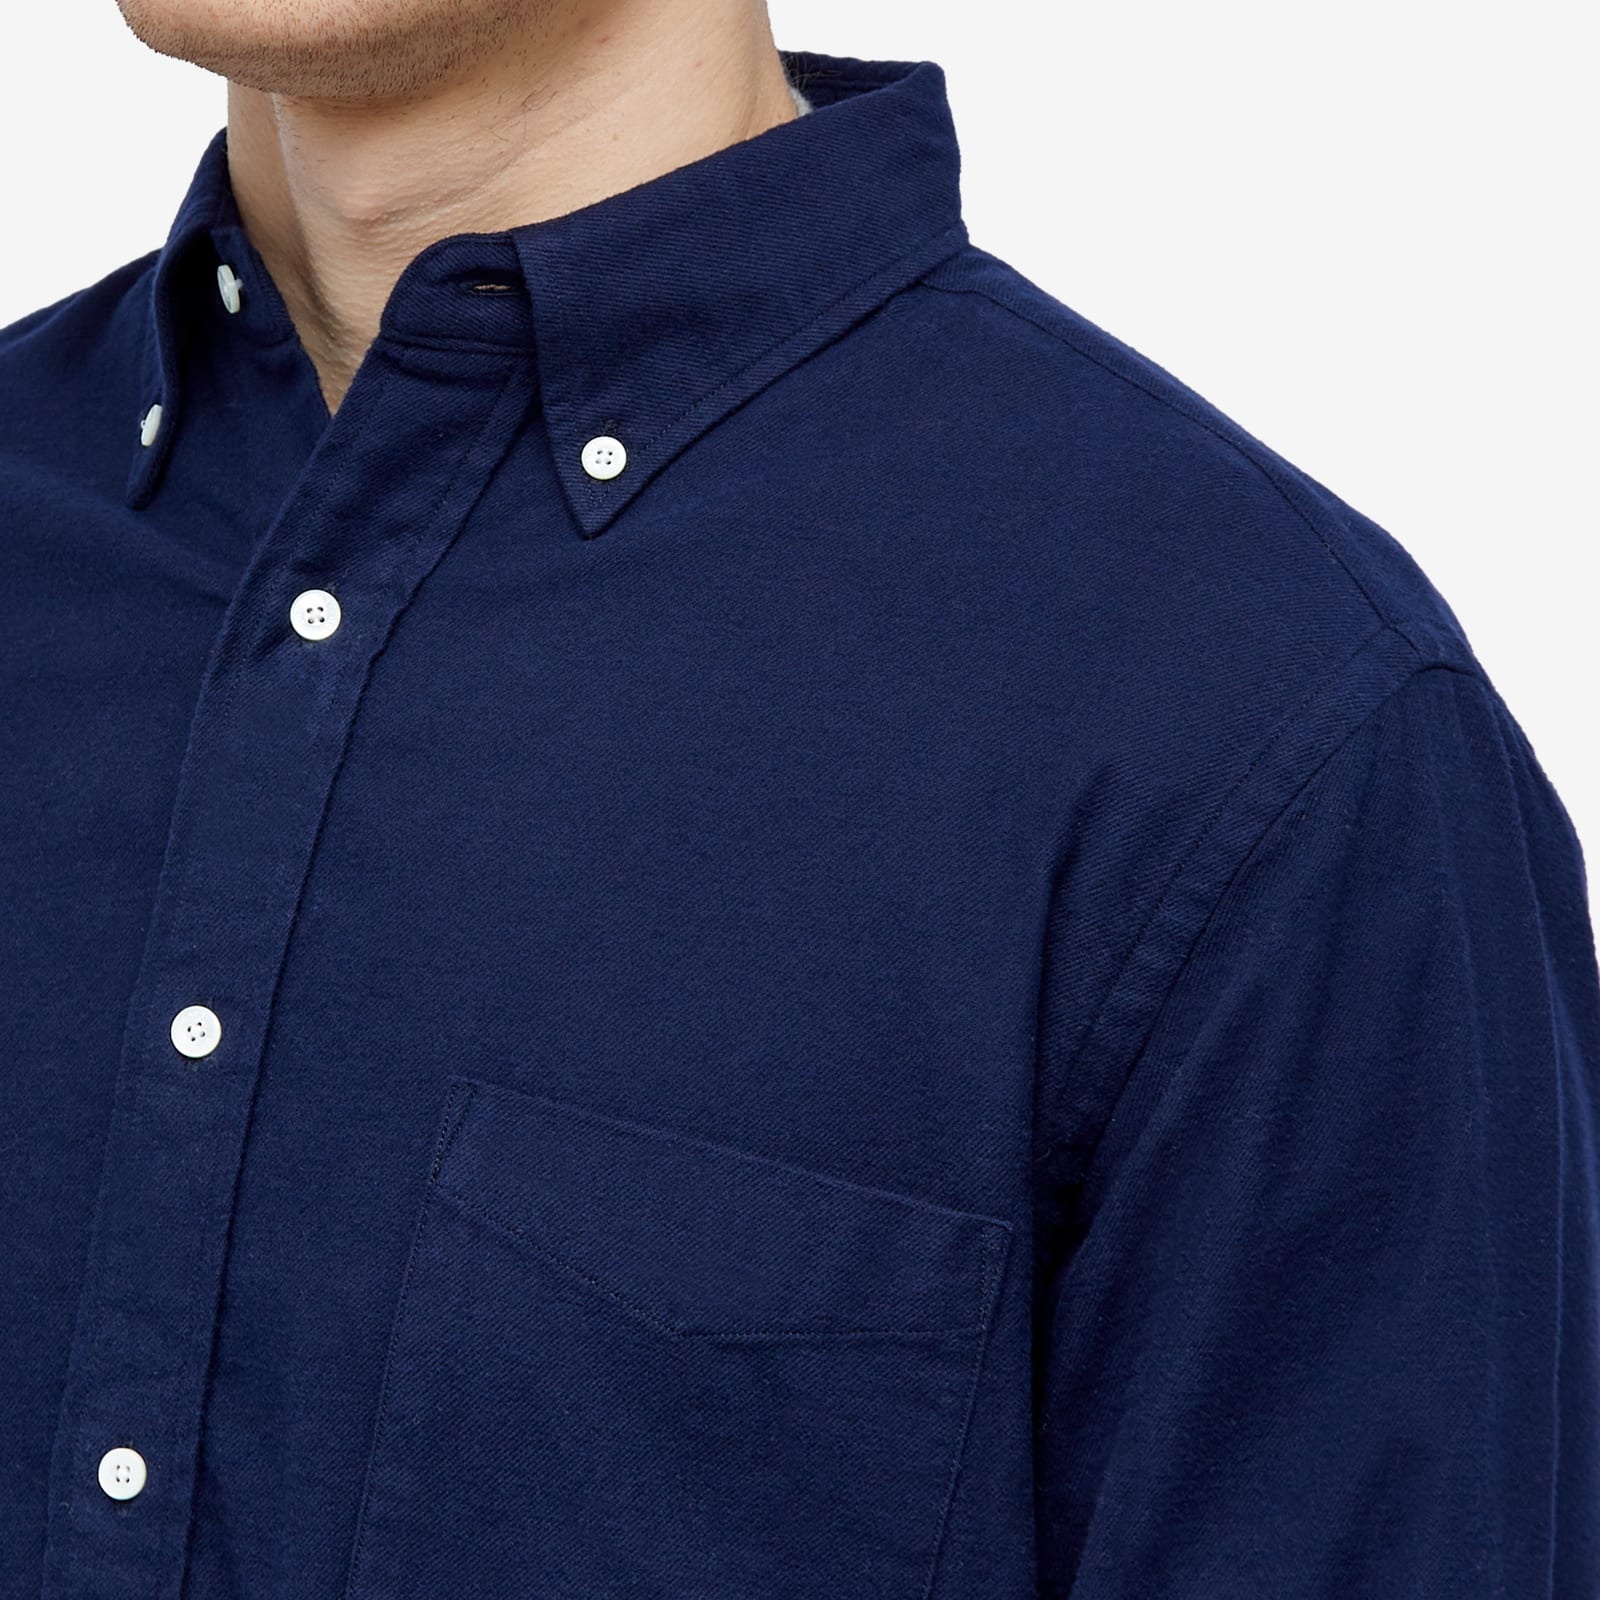 Beams Plus Button Down Solid Flannel Shirt - 5